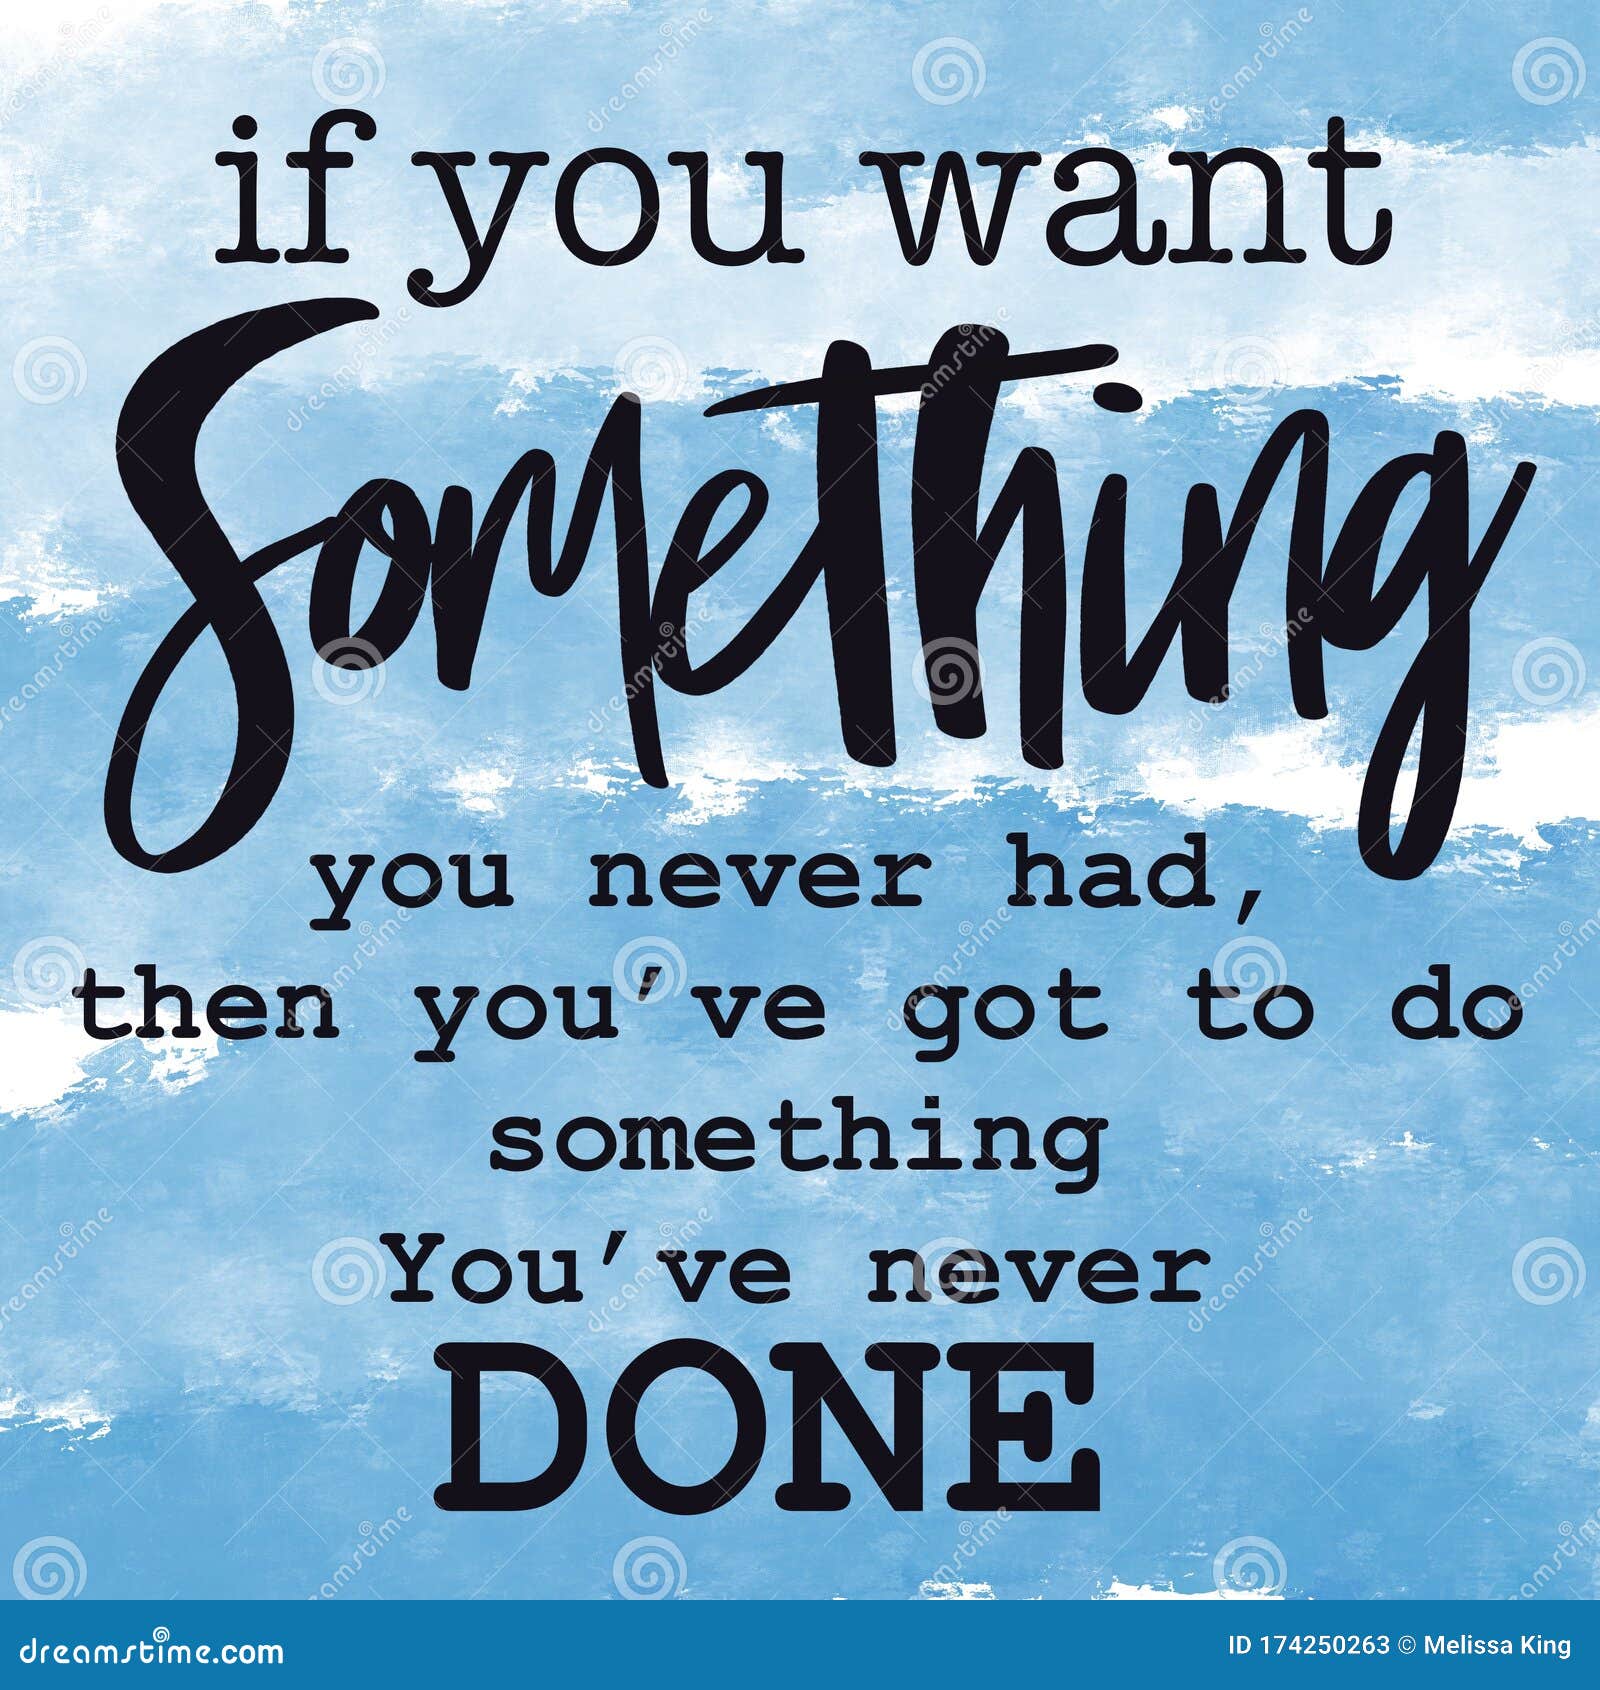 If You Want Something You Have Never Had You Have Got To Do Something You Have Never Done